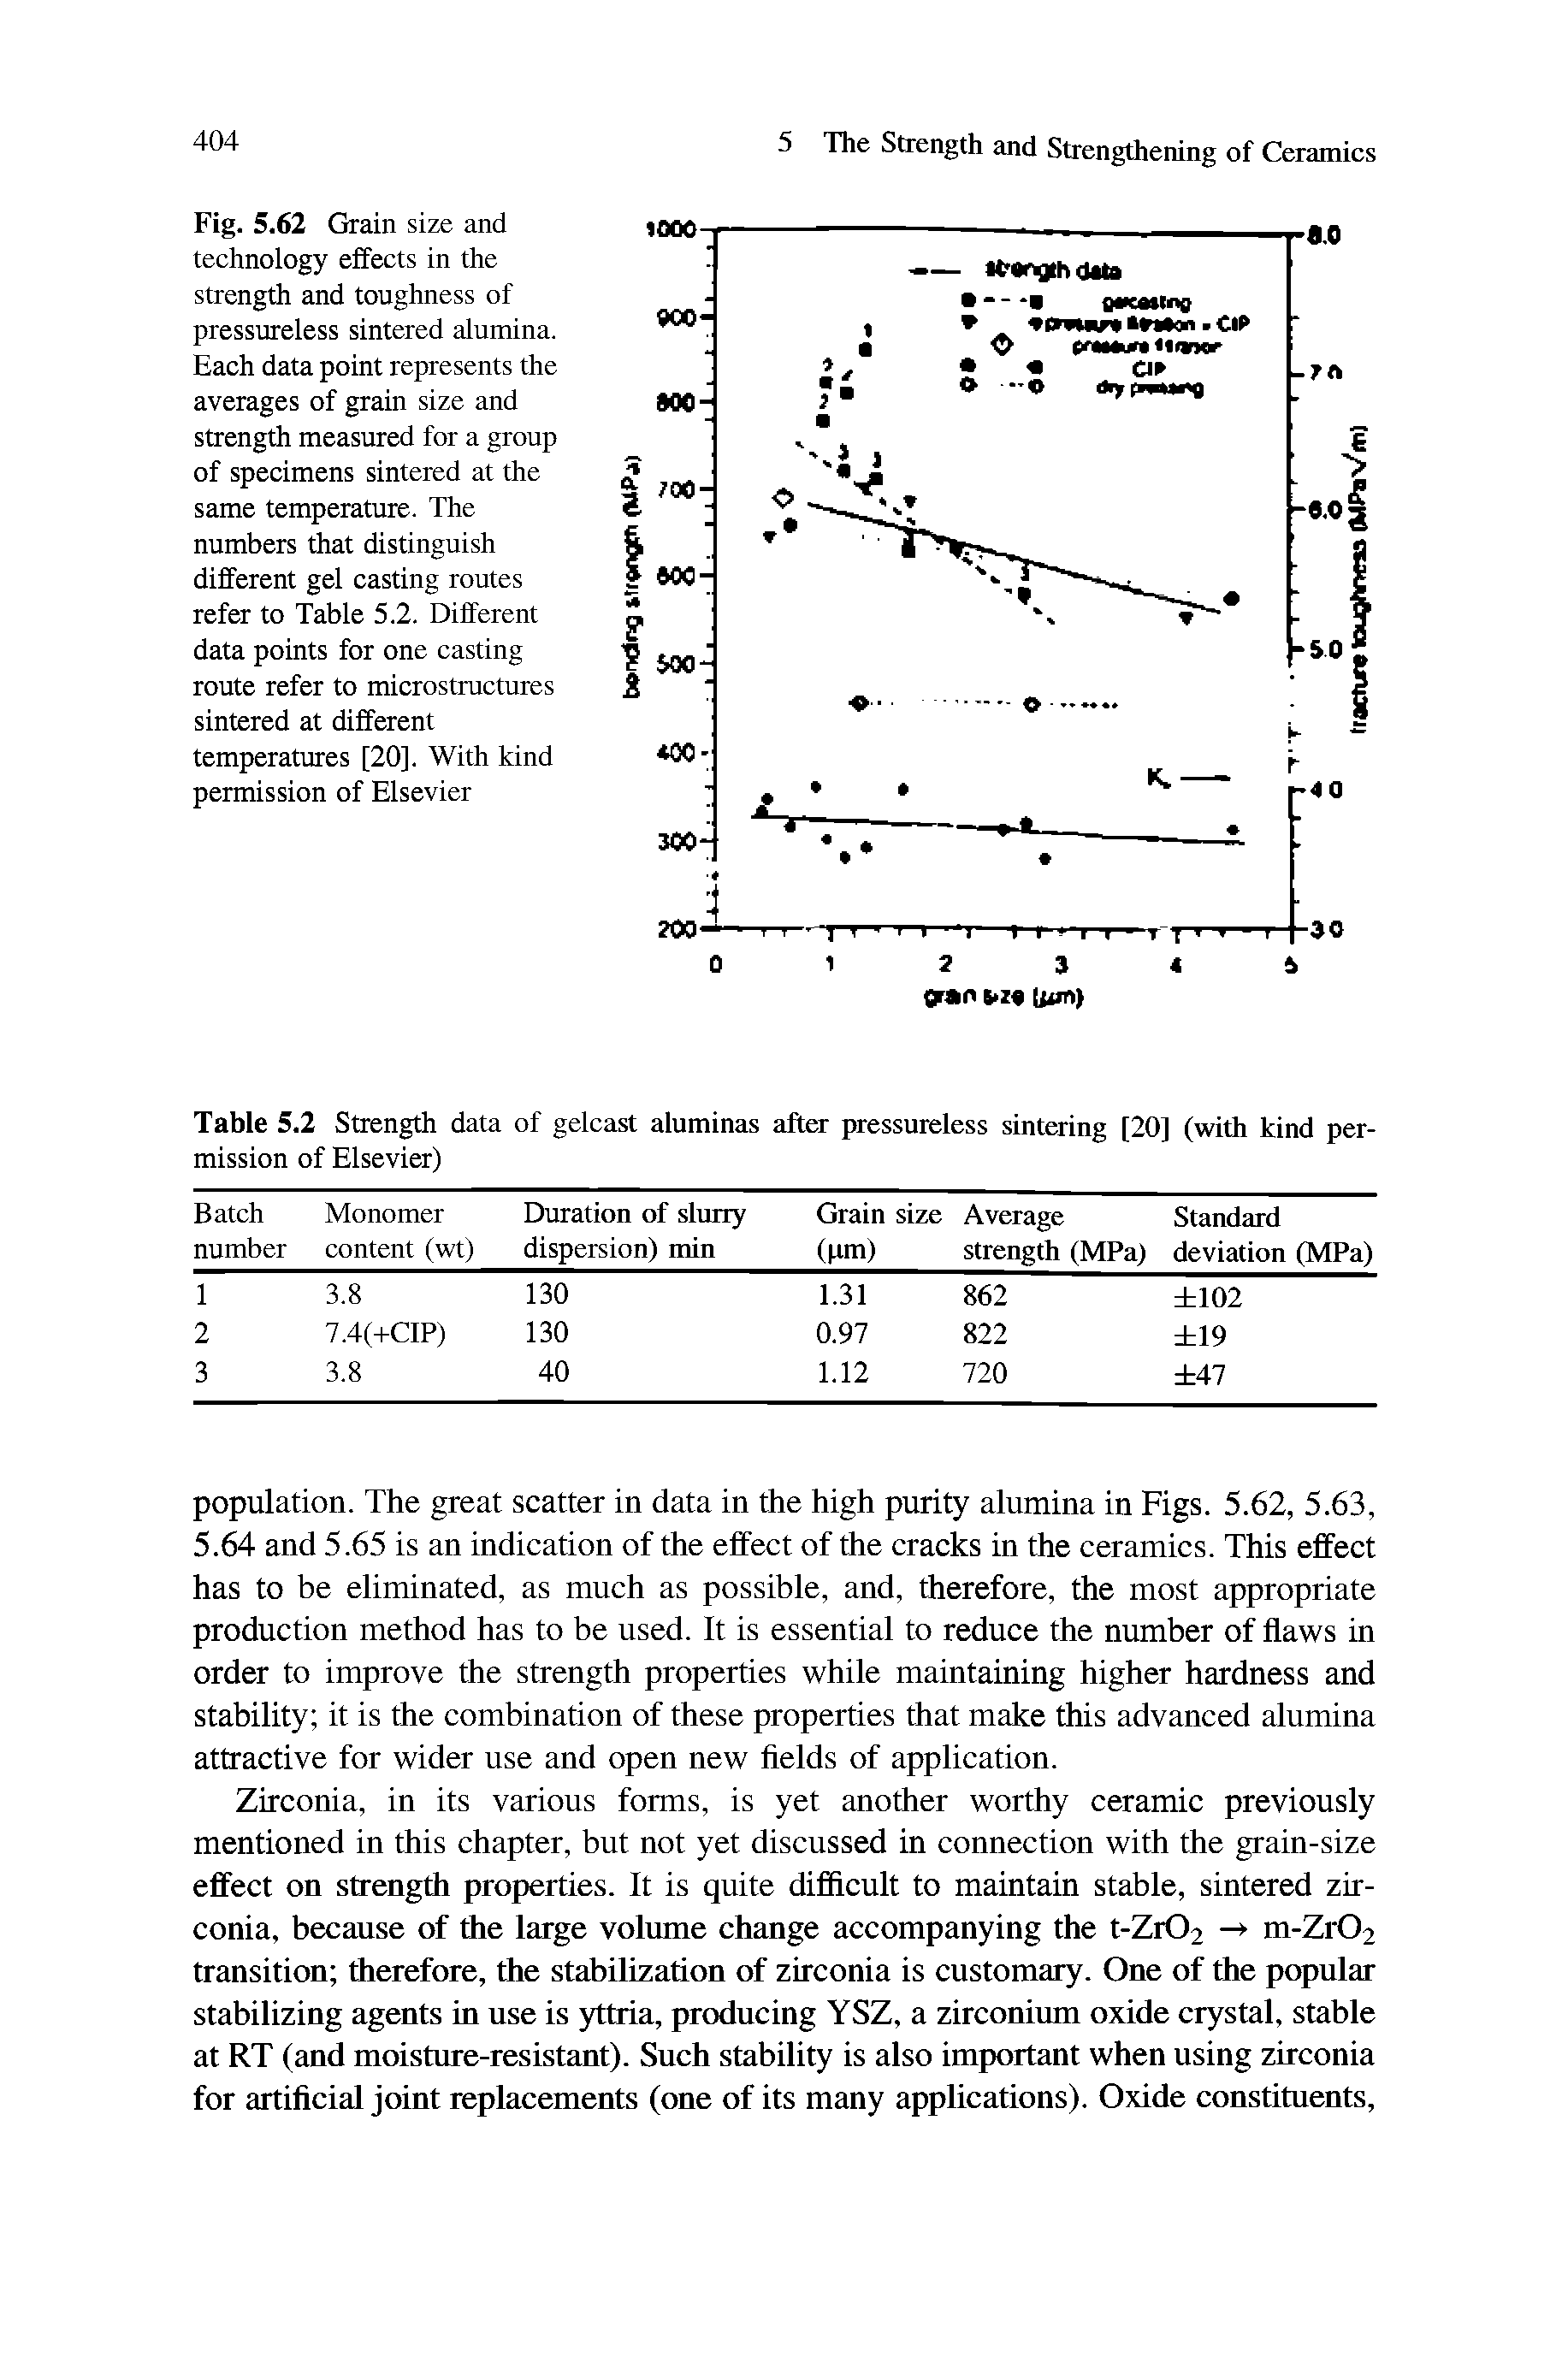 Fig. 5.62 Grain size and technology effects in the strength and toughness of pressureless sintered alumina. Each data point represents the averages of grain size and strength measured for a group of specimens sintered at the same temperature. The numbers that distinguish different gel casting routes refer to Table 5.2. Different data points for one casting route refer to microstructures sintered at different temperatures [20]. With kind permission of Elsevier...